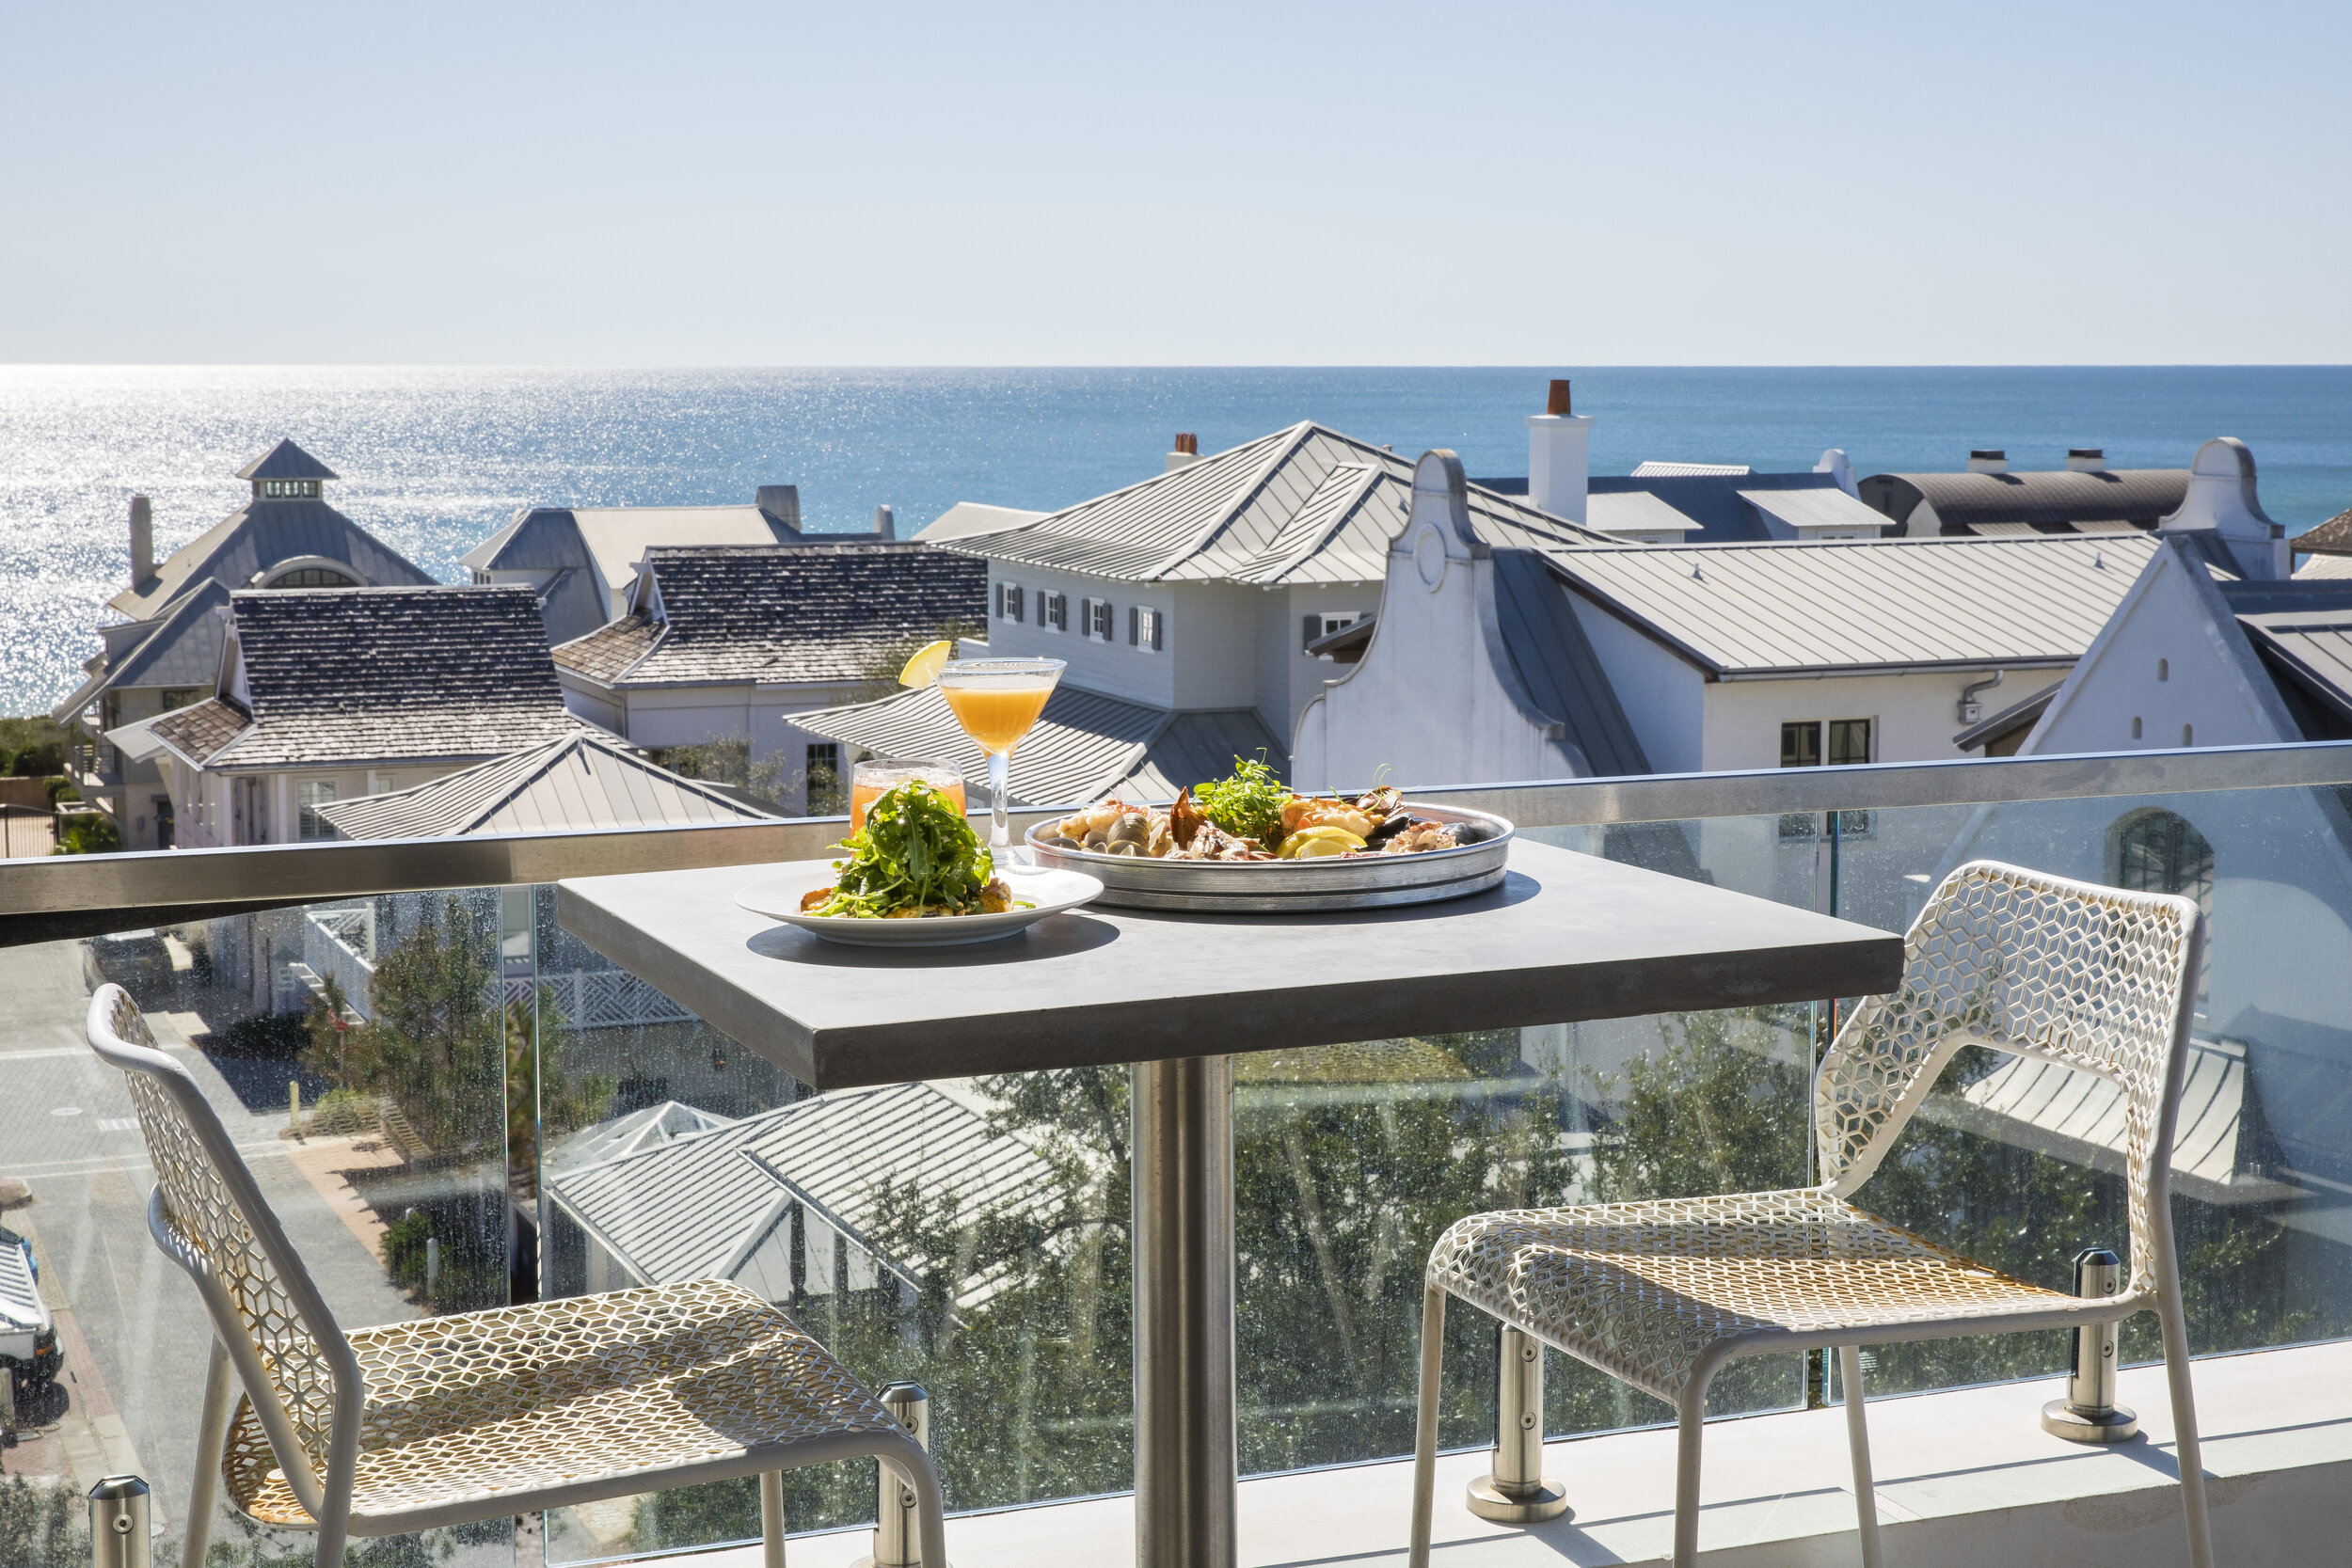 A rooftop table overlooks houses and beyond them, the Gulf Coast.